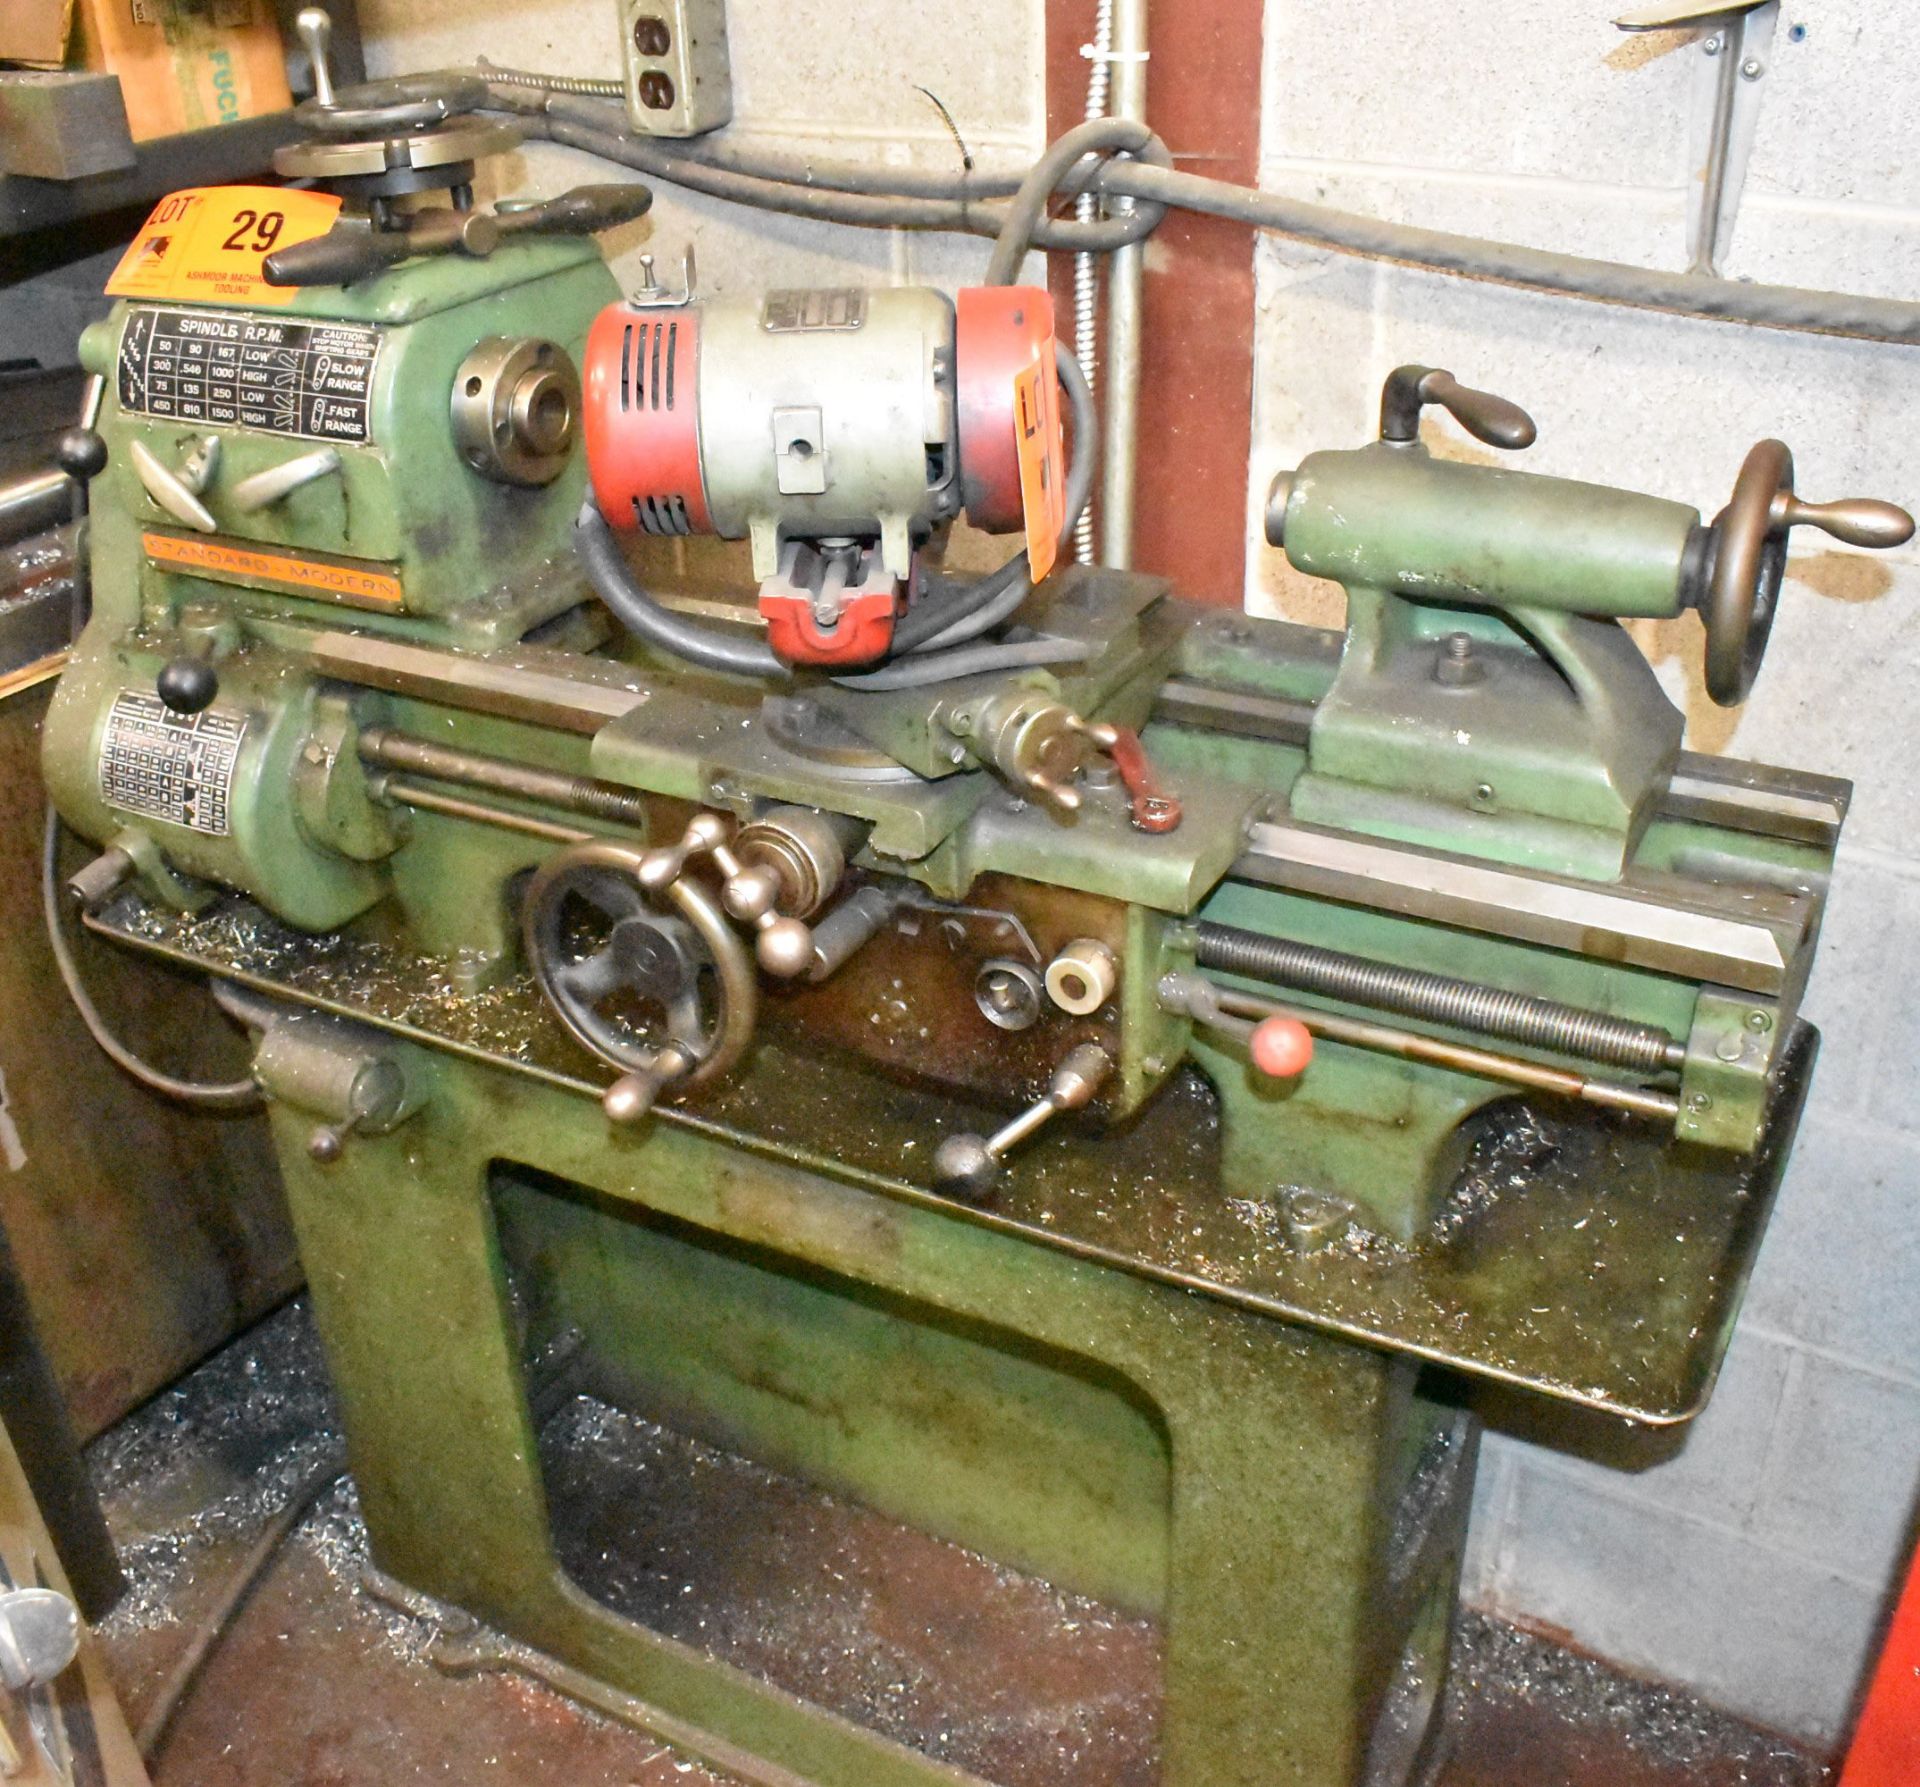 STANDARD-MODERN TOOL ROOM LATHE WITH 10" SWING OVER BED, 24" BETWEEN CENTERS, 1" SPINDLE BORE, - Image 6 of 7